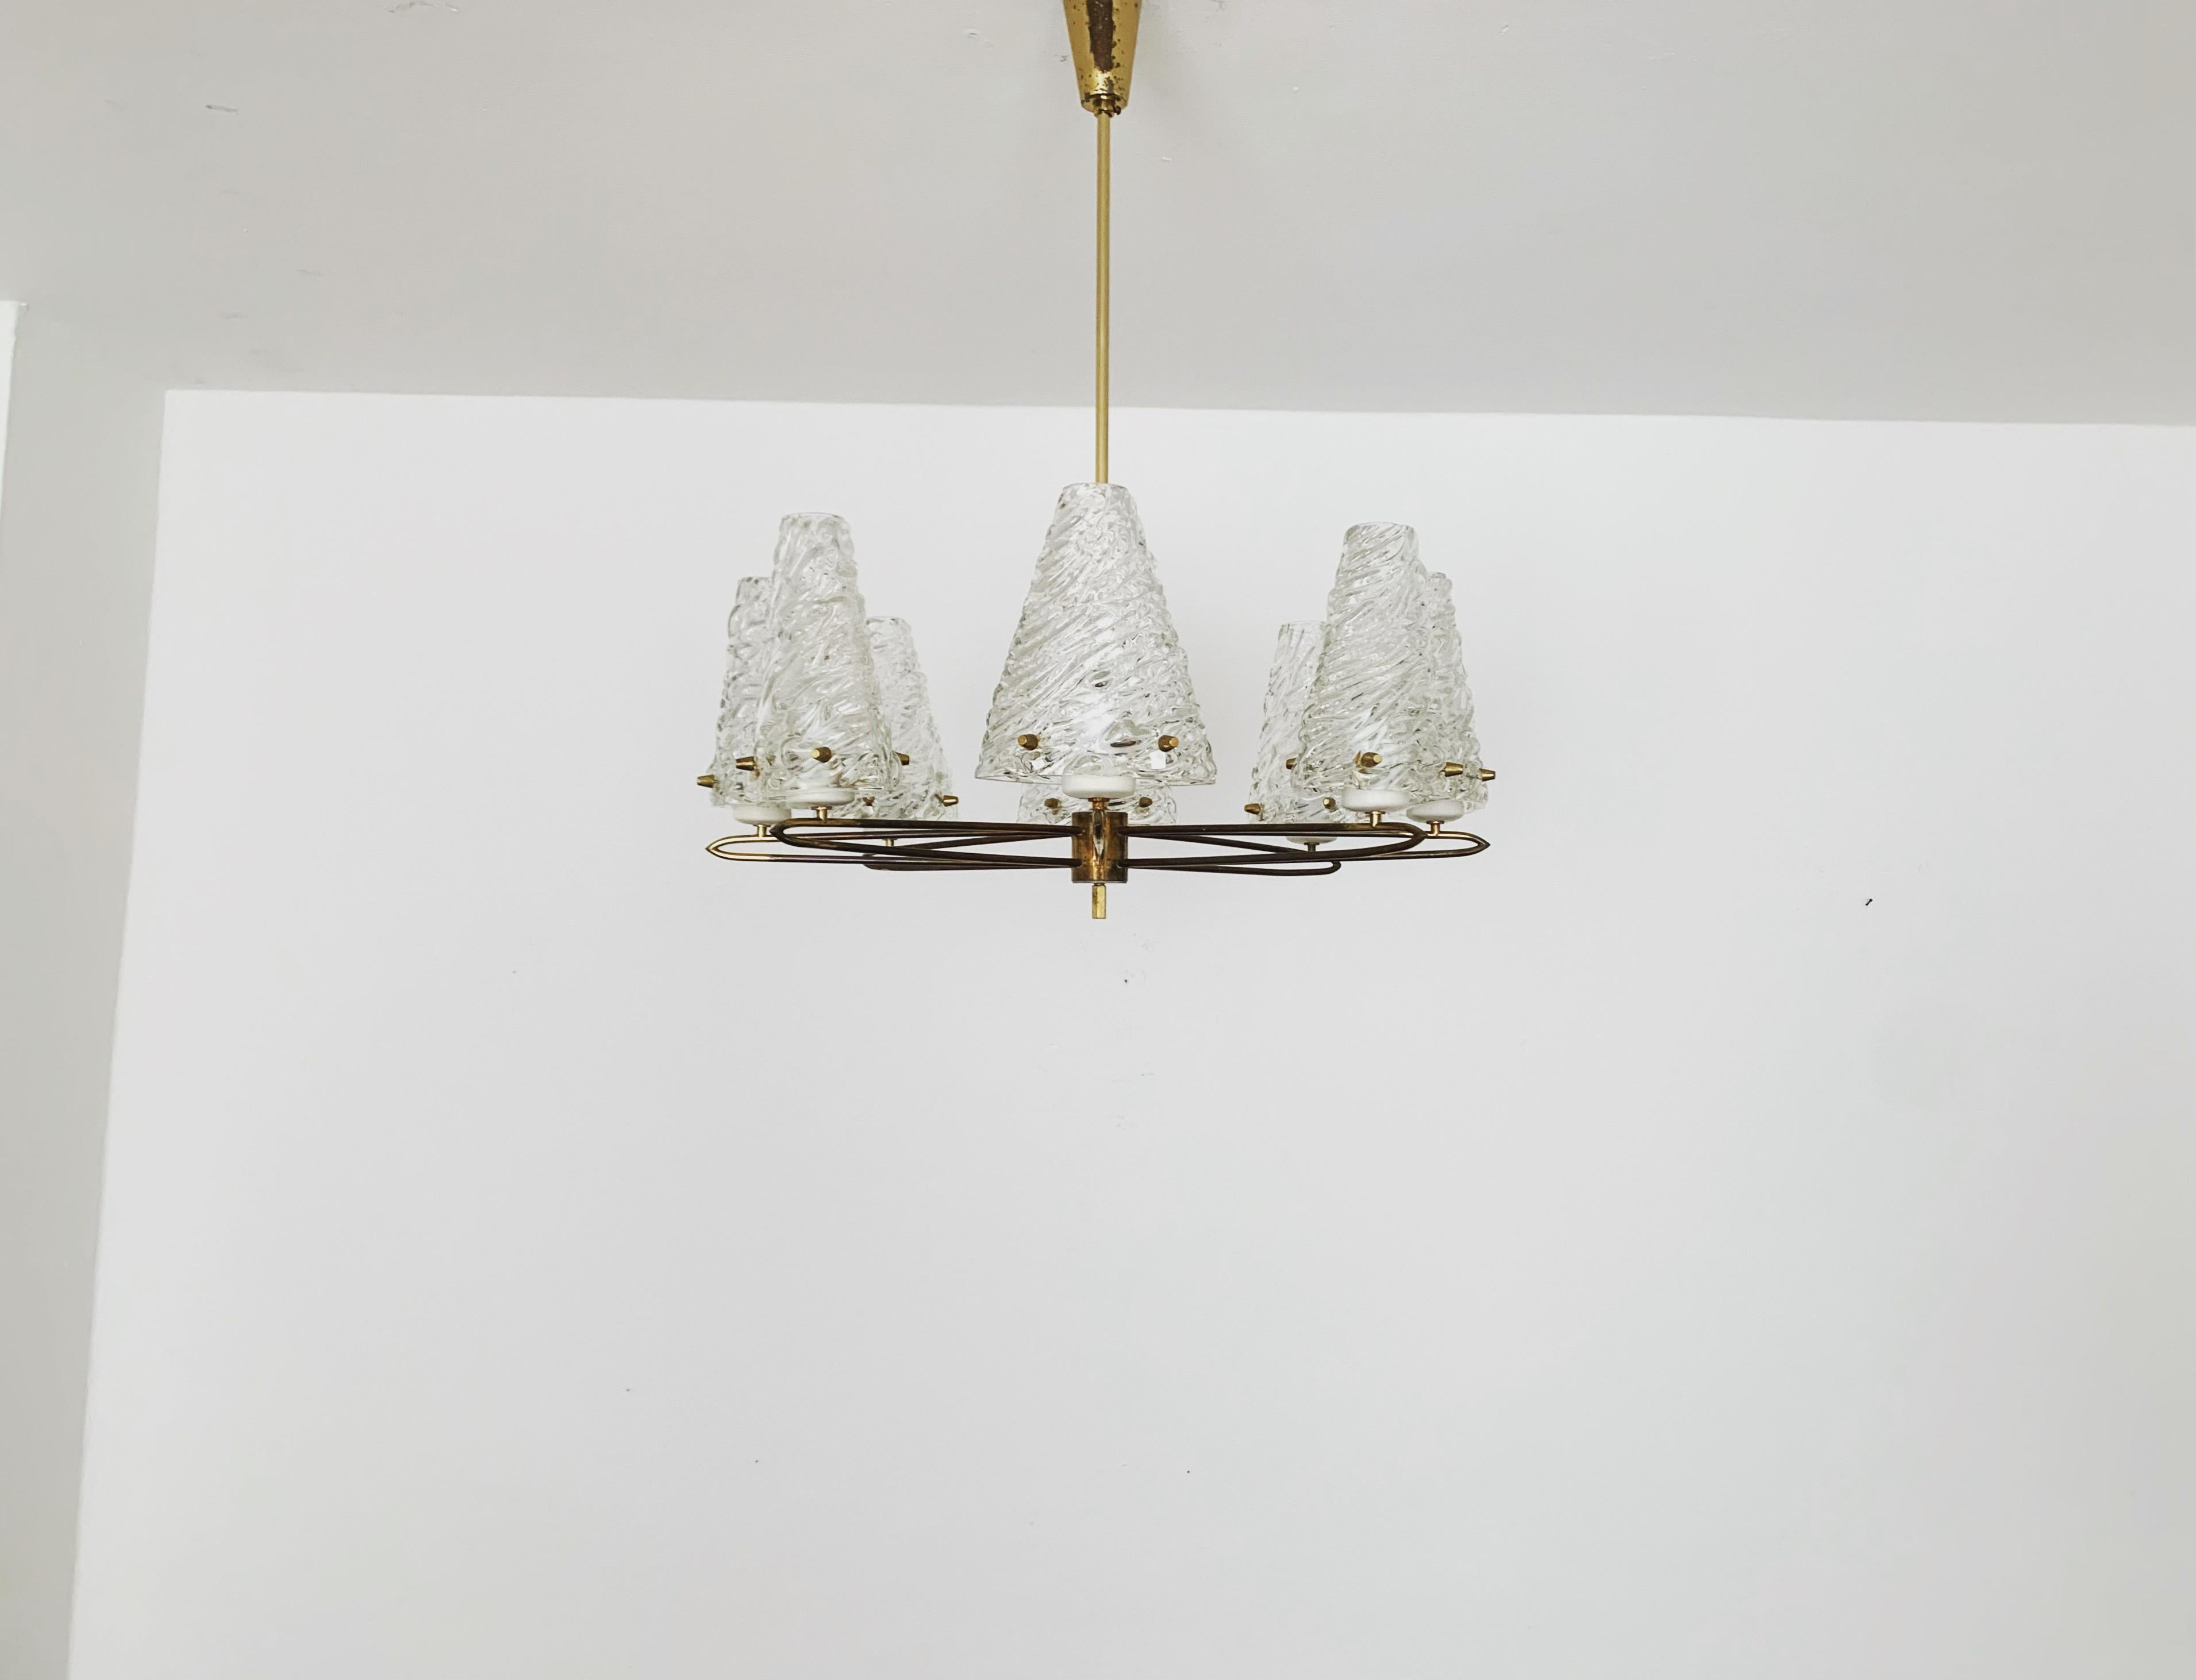 Stunningly beautiful crystal glass chandelier from the 1950s.
Wonderful mouth-blown glass with a great structure.
The filigree brass frame underlines the noble appearance.
The design and the materials used create a great glittering light.
An